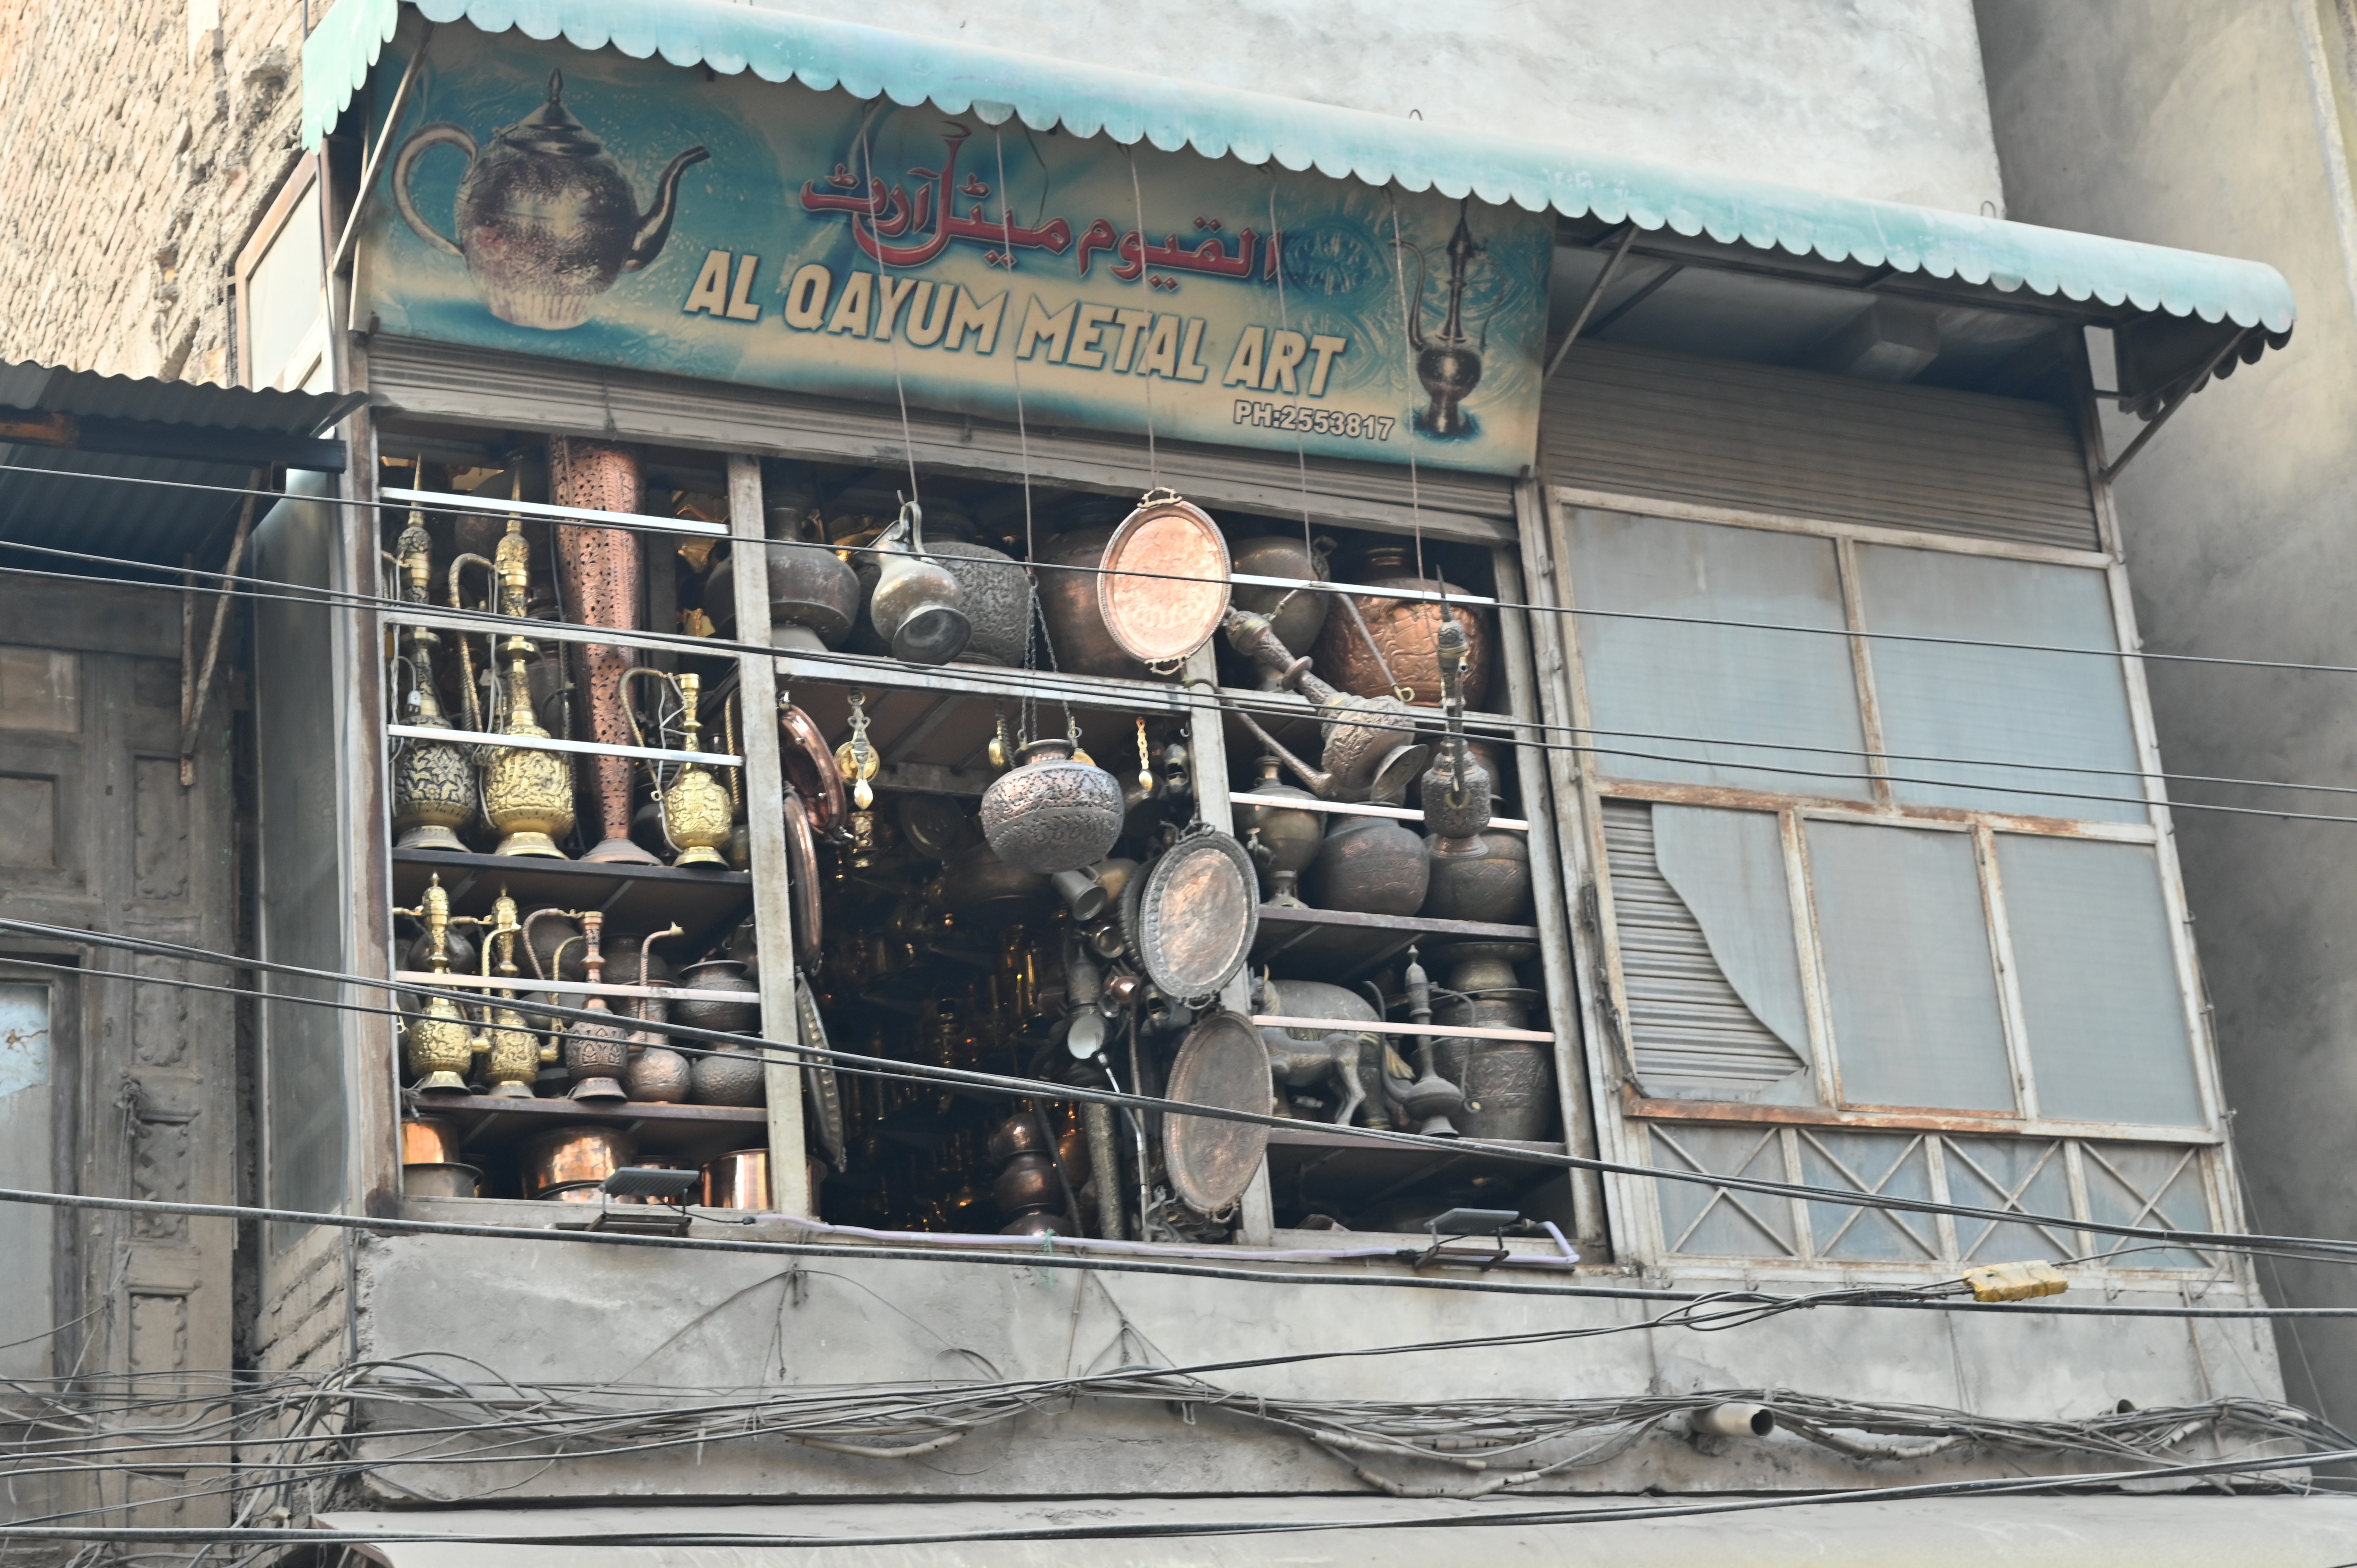 A shop having utensils and decoration pieces with metallic art